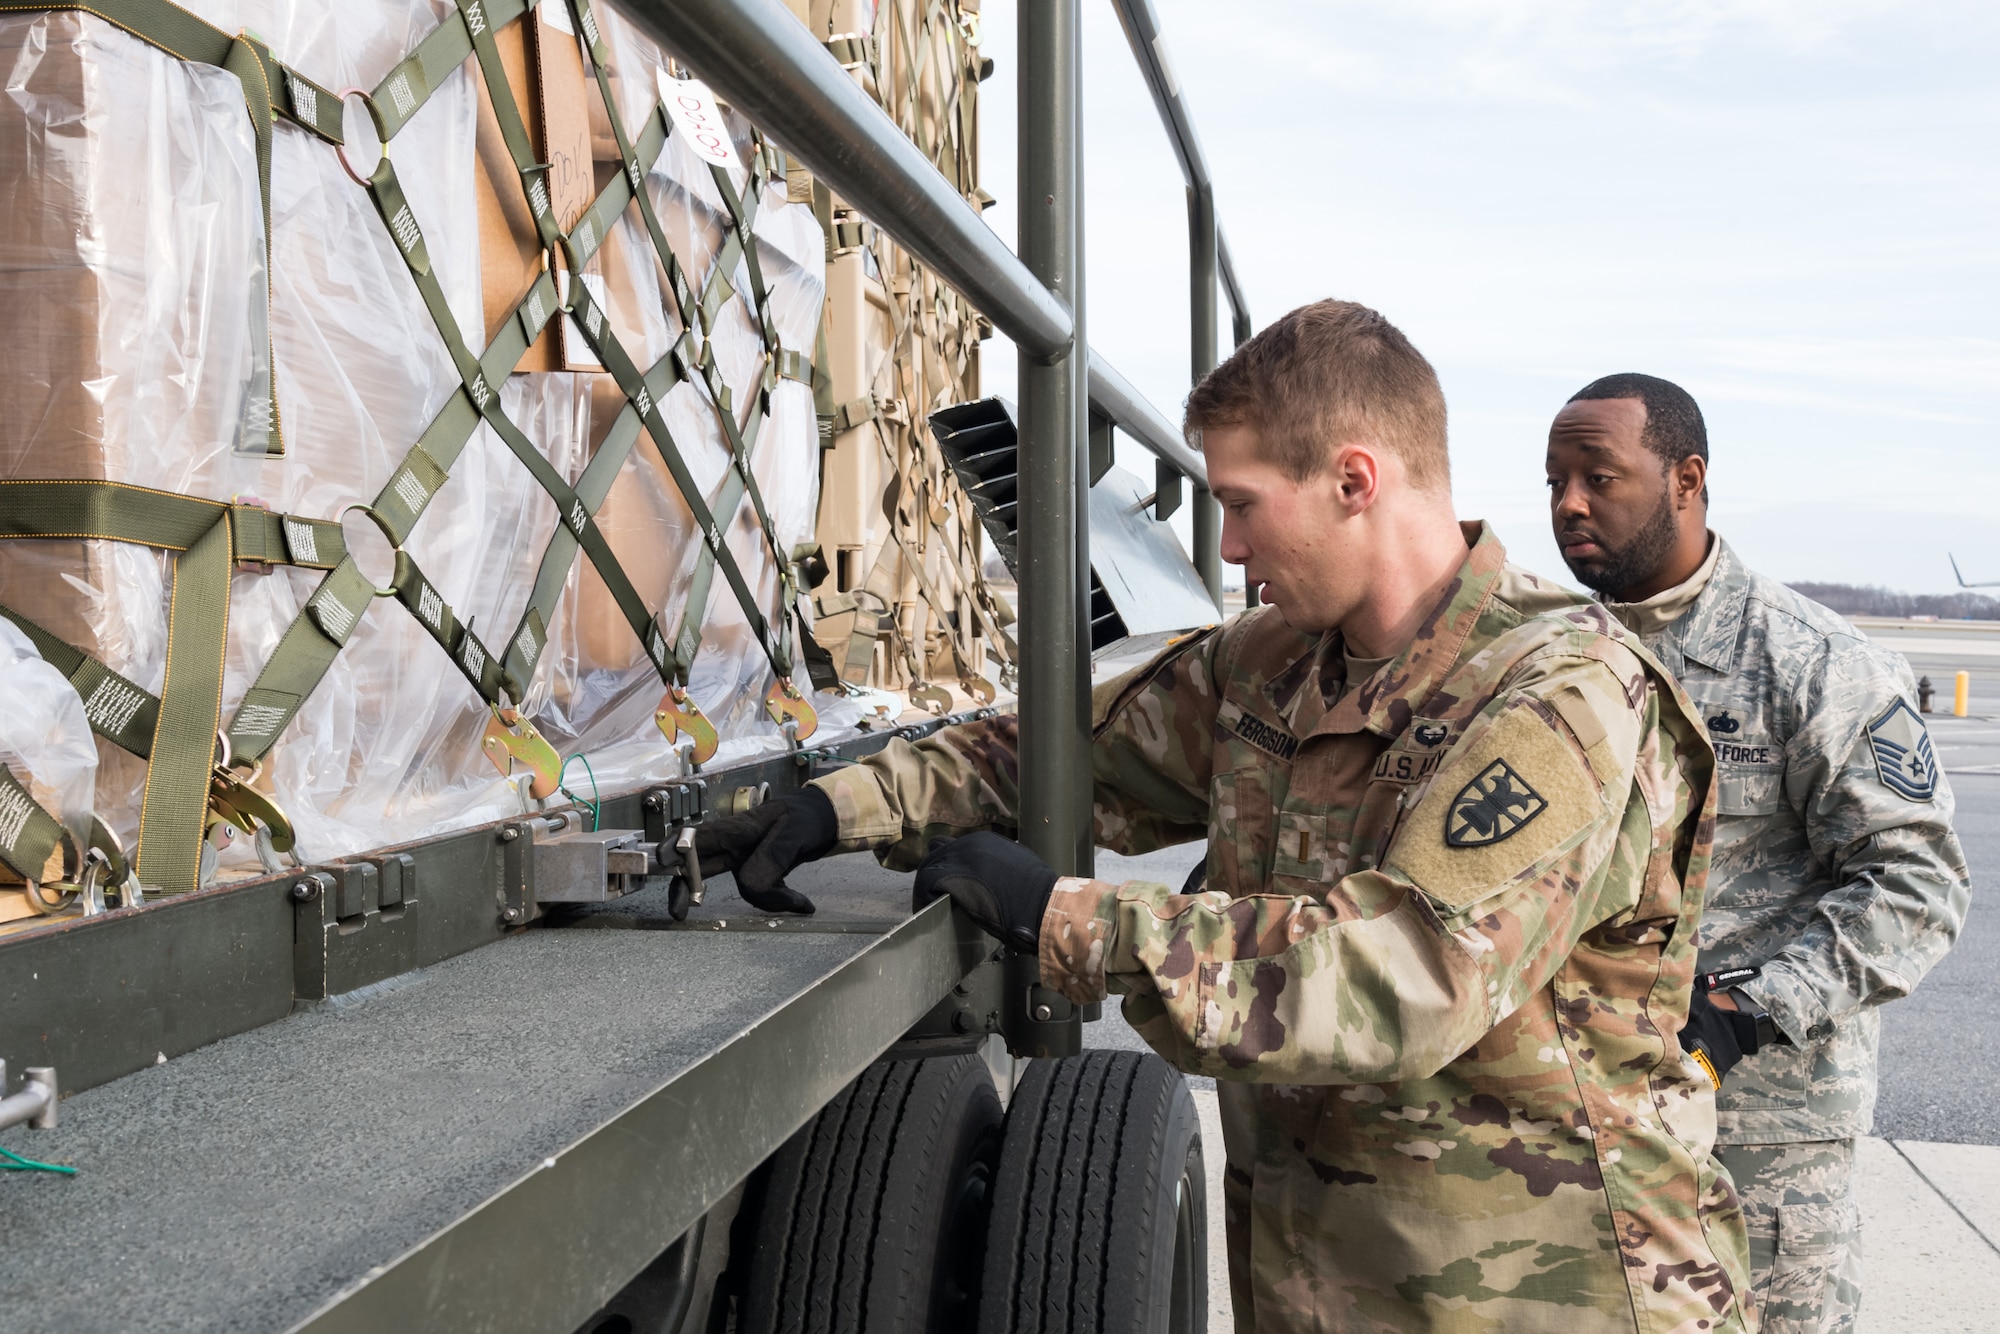 Air Force Master Sgt. Gerard Carry, 436th Aerial Port Squadron ramp operations noncommissioned officer in charge, observes Army 2nd Lt. Mackenzie Ferguson, 622nd Movement Control Team movement officer, Joint Base Langley-Eustis, Va., engage a cargo pallet lock on a 60-ton K-loader Jan. 10, 2020, on Dover Air Force Base, Del. In a scheduled joint partnership training event, 16 members from the 622nd MCT came to Dover AFB for cargo and personnel processing training. (U.S. Air Force photo by Roland Balik)